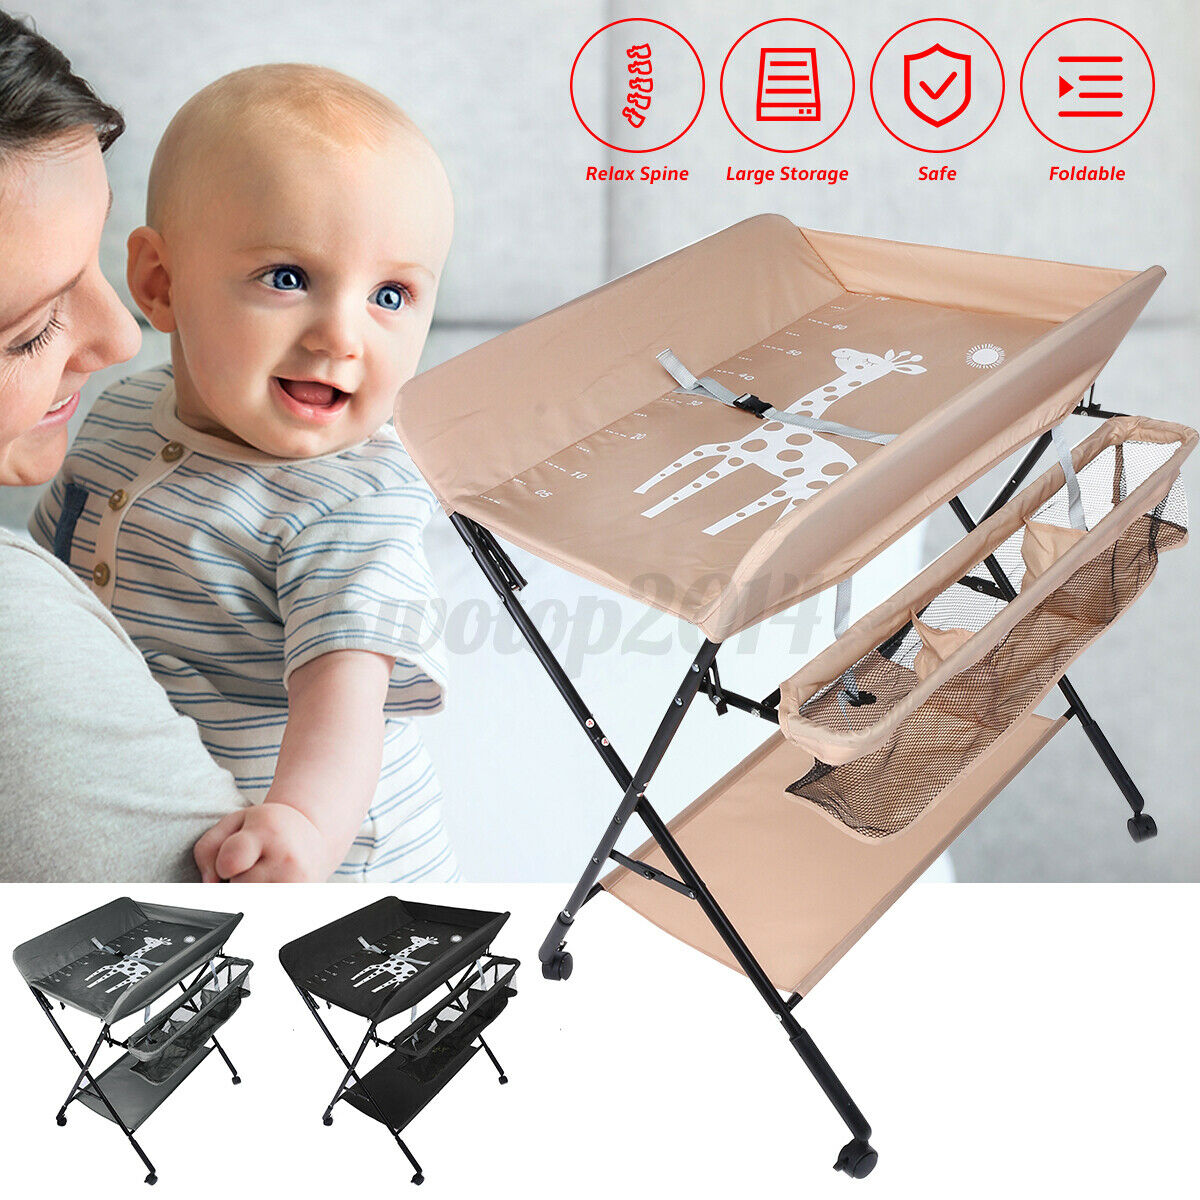 Foldable Baby Change Table 0-24 Months Diaper Changing Table W/ Wheels Storage